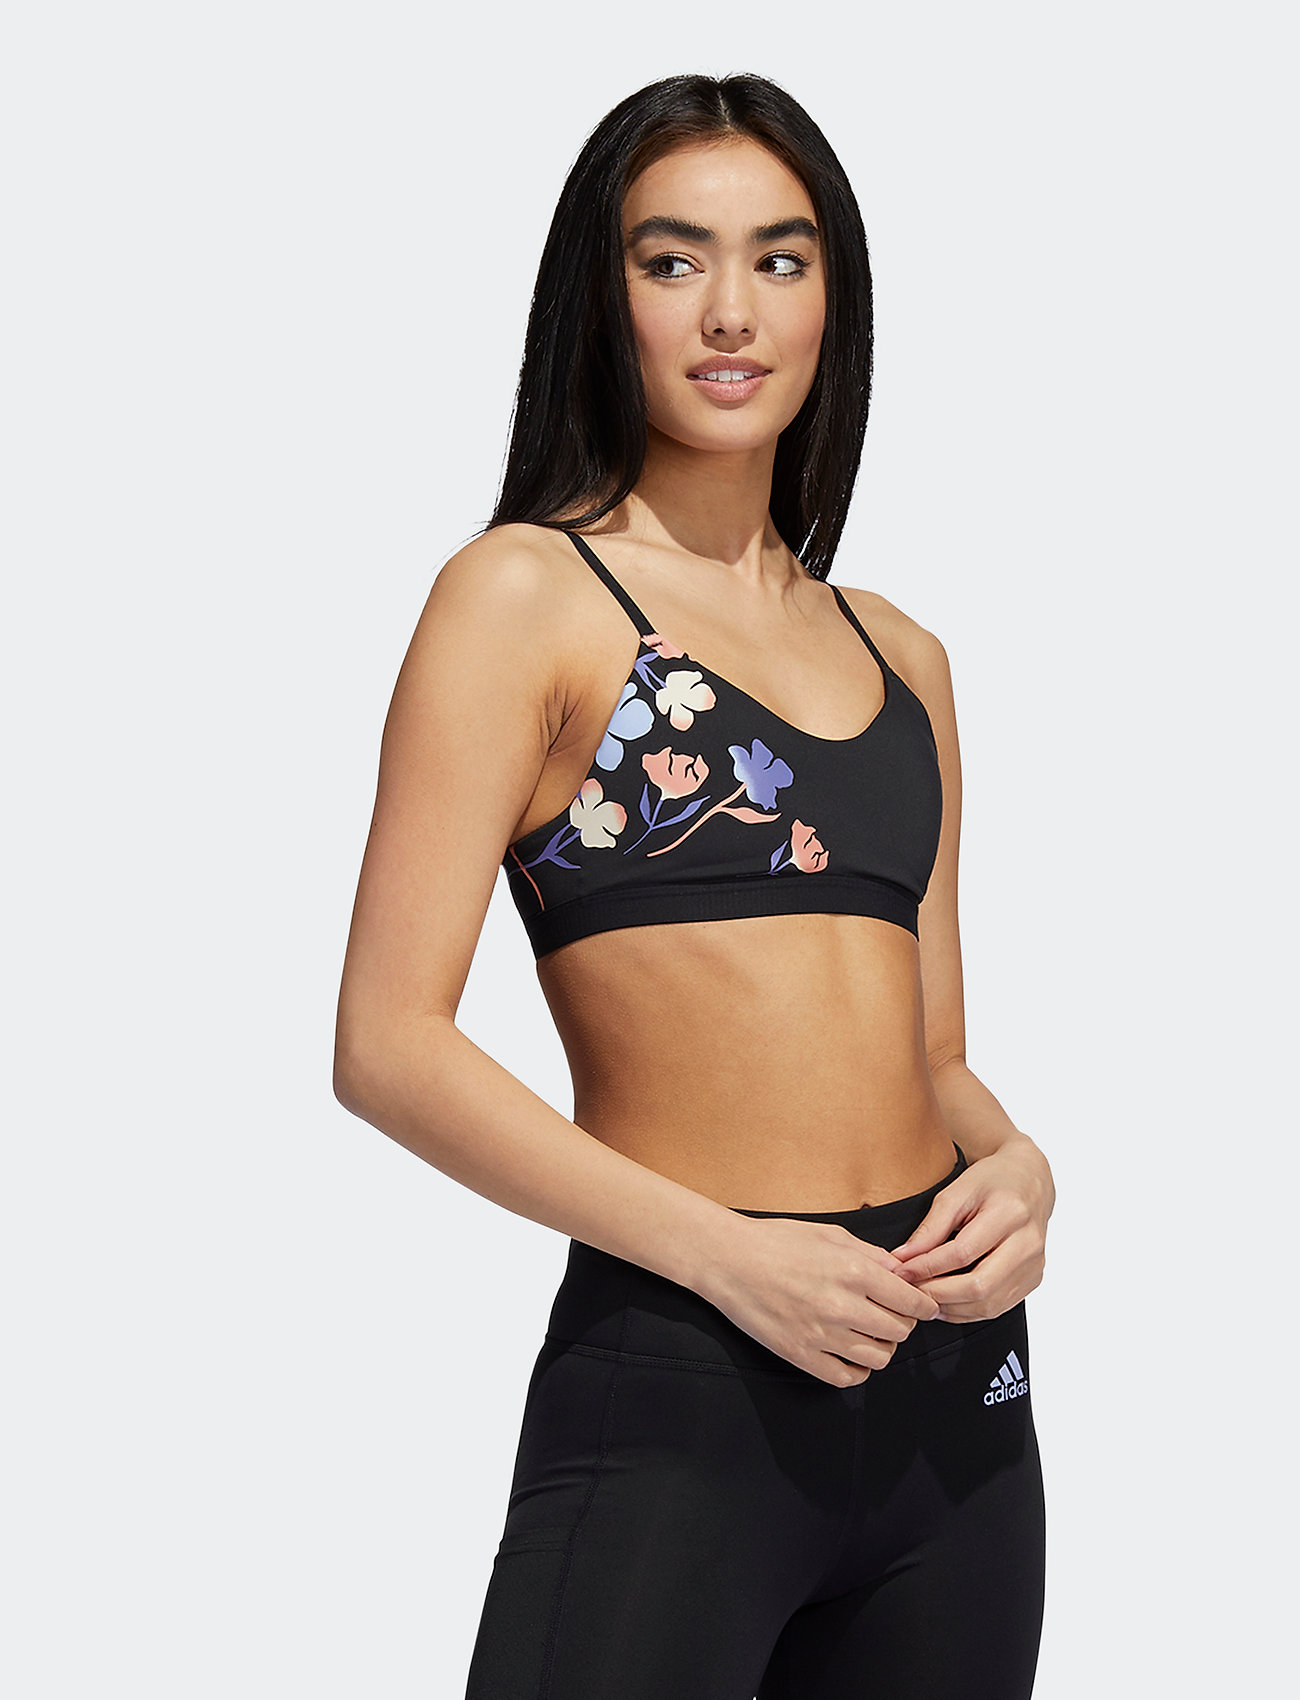 tin lur afslappet adidas Performance Floral Graphic Low Support Sports Bra W - Sports bras |  Boozt.com